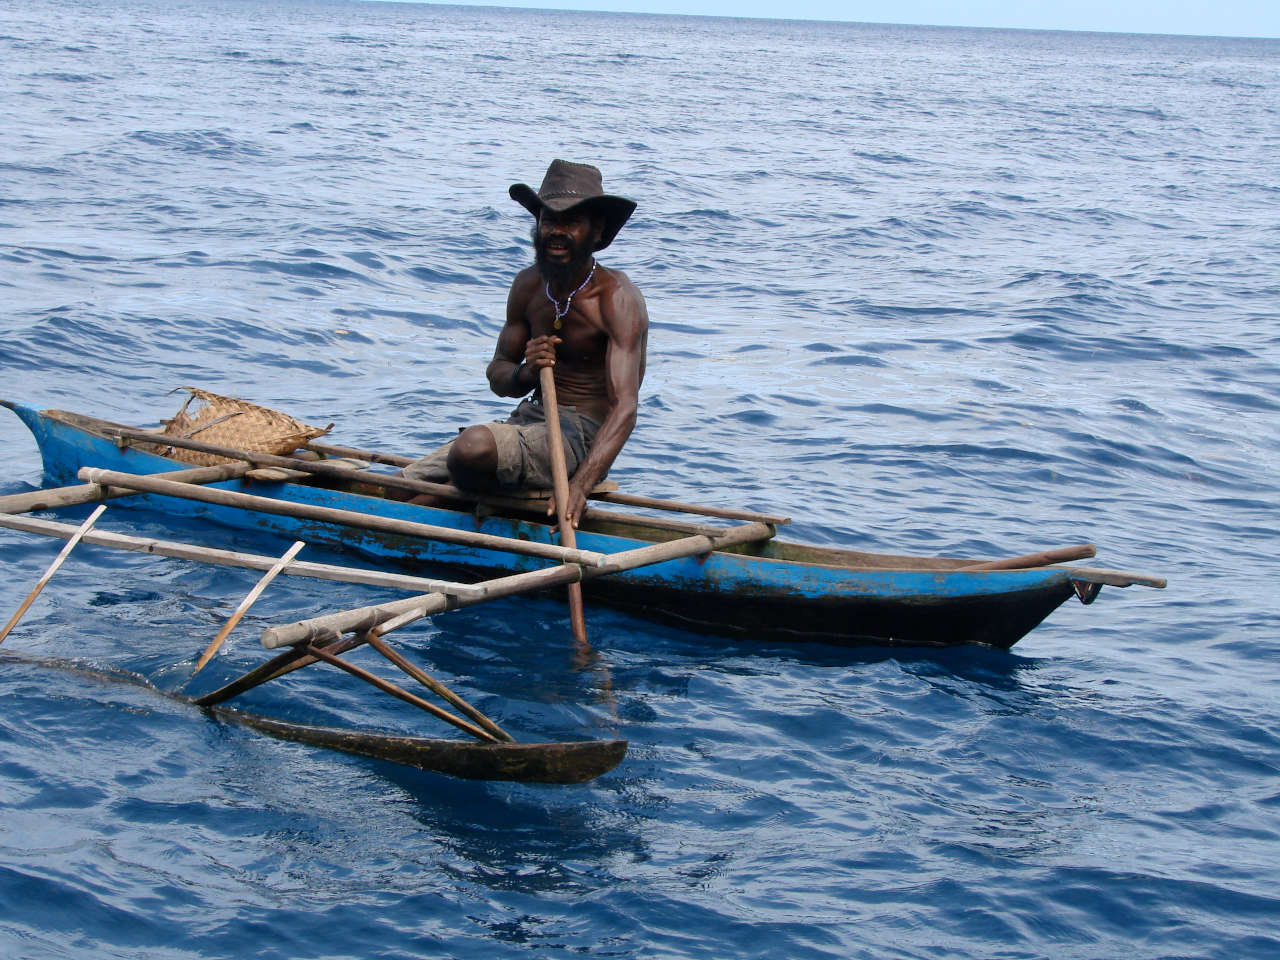 Local in an outrigger canoe